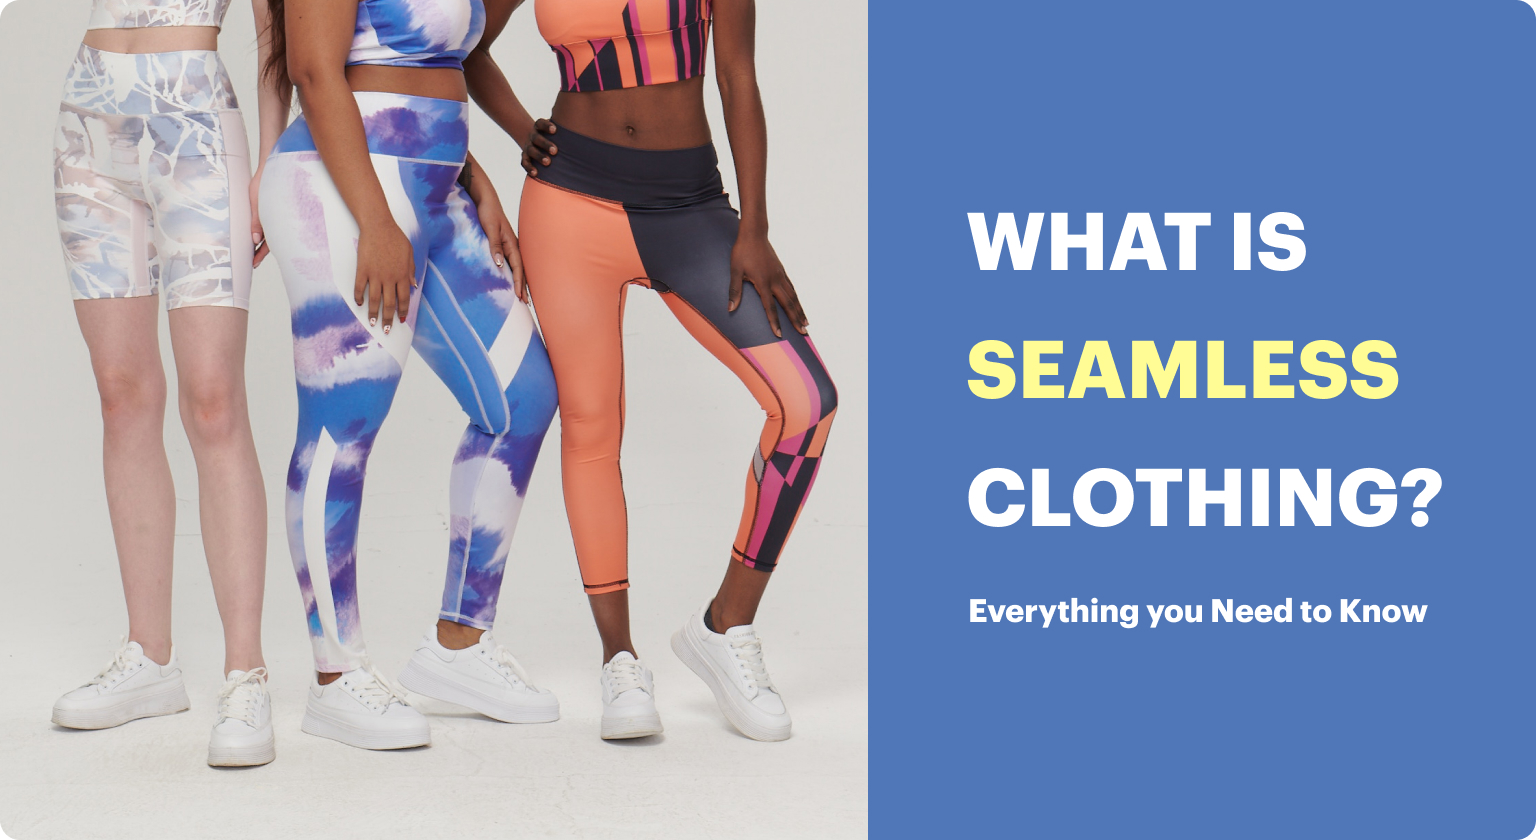 What Is Seamless Clothing